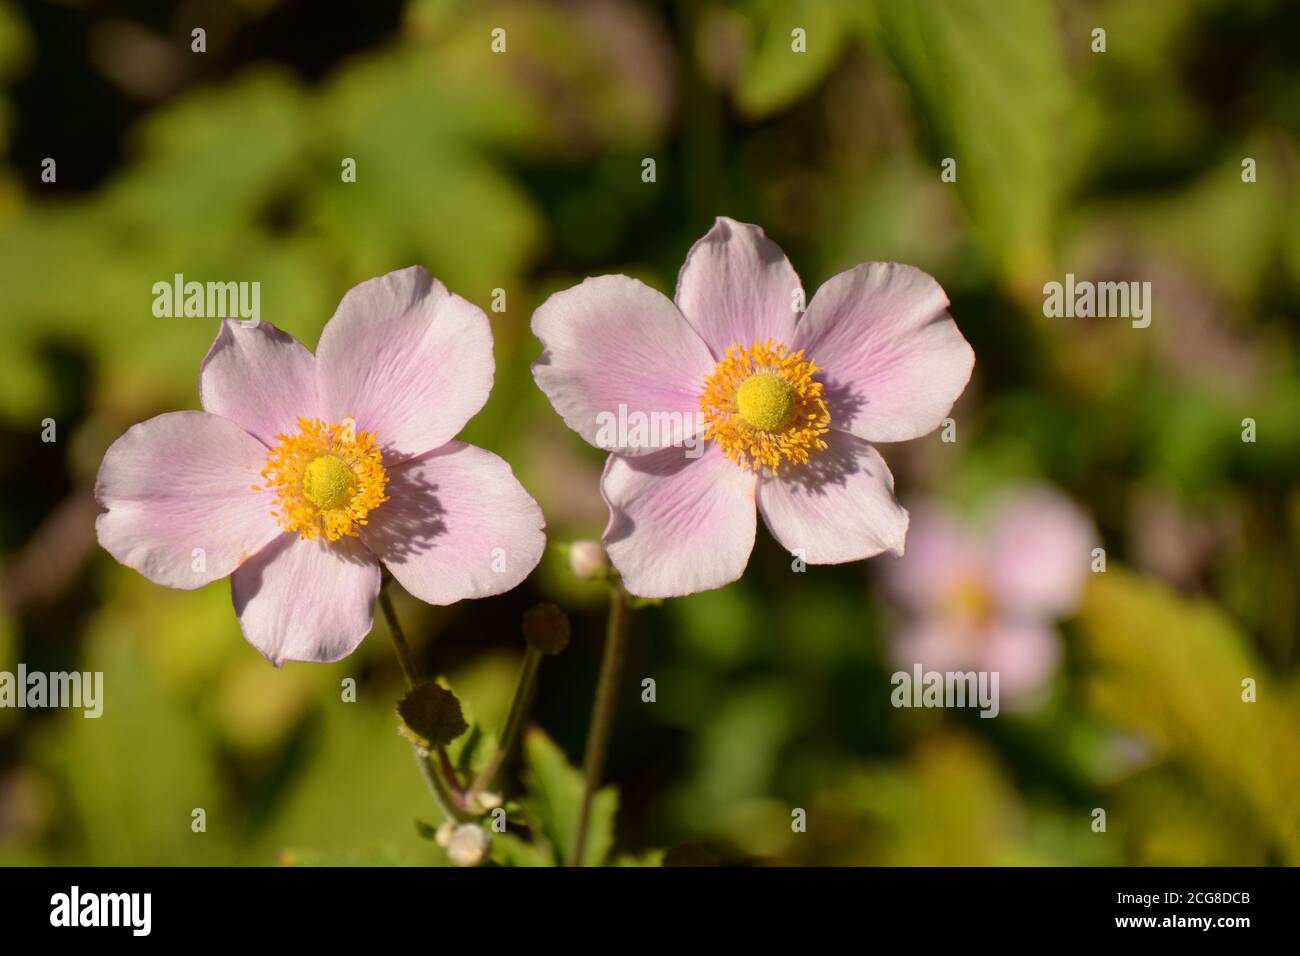 close-up of thimbleweed pink flowers in late summer sun Stock Photo